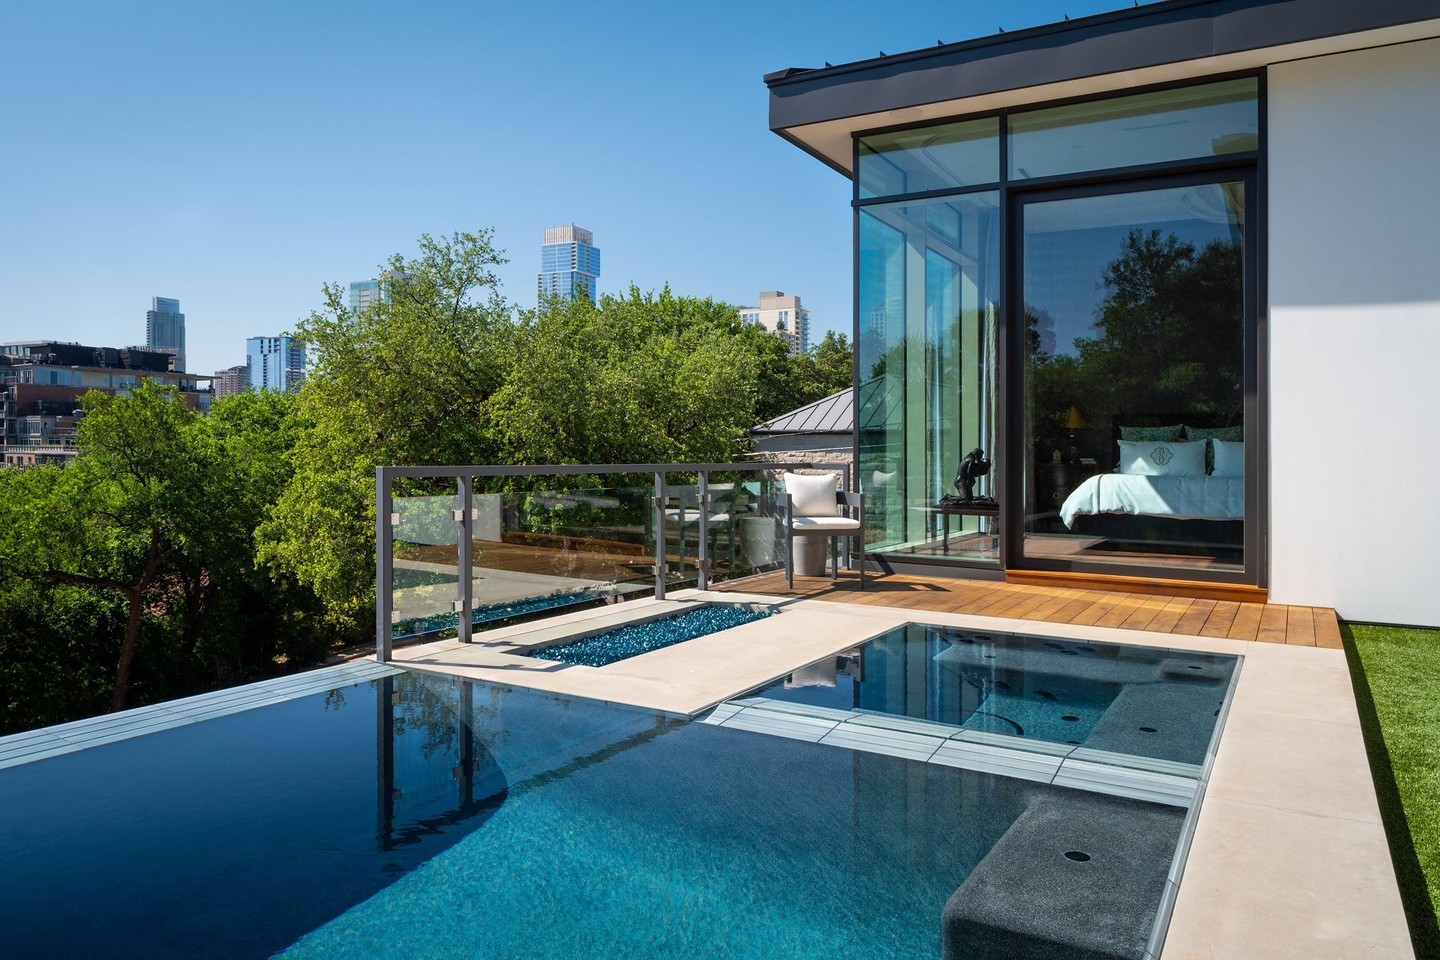 Our clients could have sheltered in place pretty much anywhere they wanted. Their first choice was to be in their new home overlooking Austin’s downtown skyline. ⁠
⁠
Built by @foursquarebuilders ⁠
Designed by @laruearchitects ⁠
Pool by @austinwaterdesigns ⁠
Interiors by @lovecounty⁠
⁠
⁠
⁠
⁠